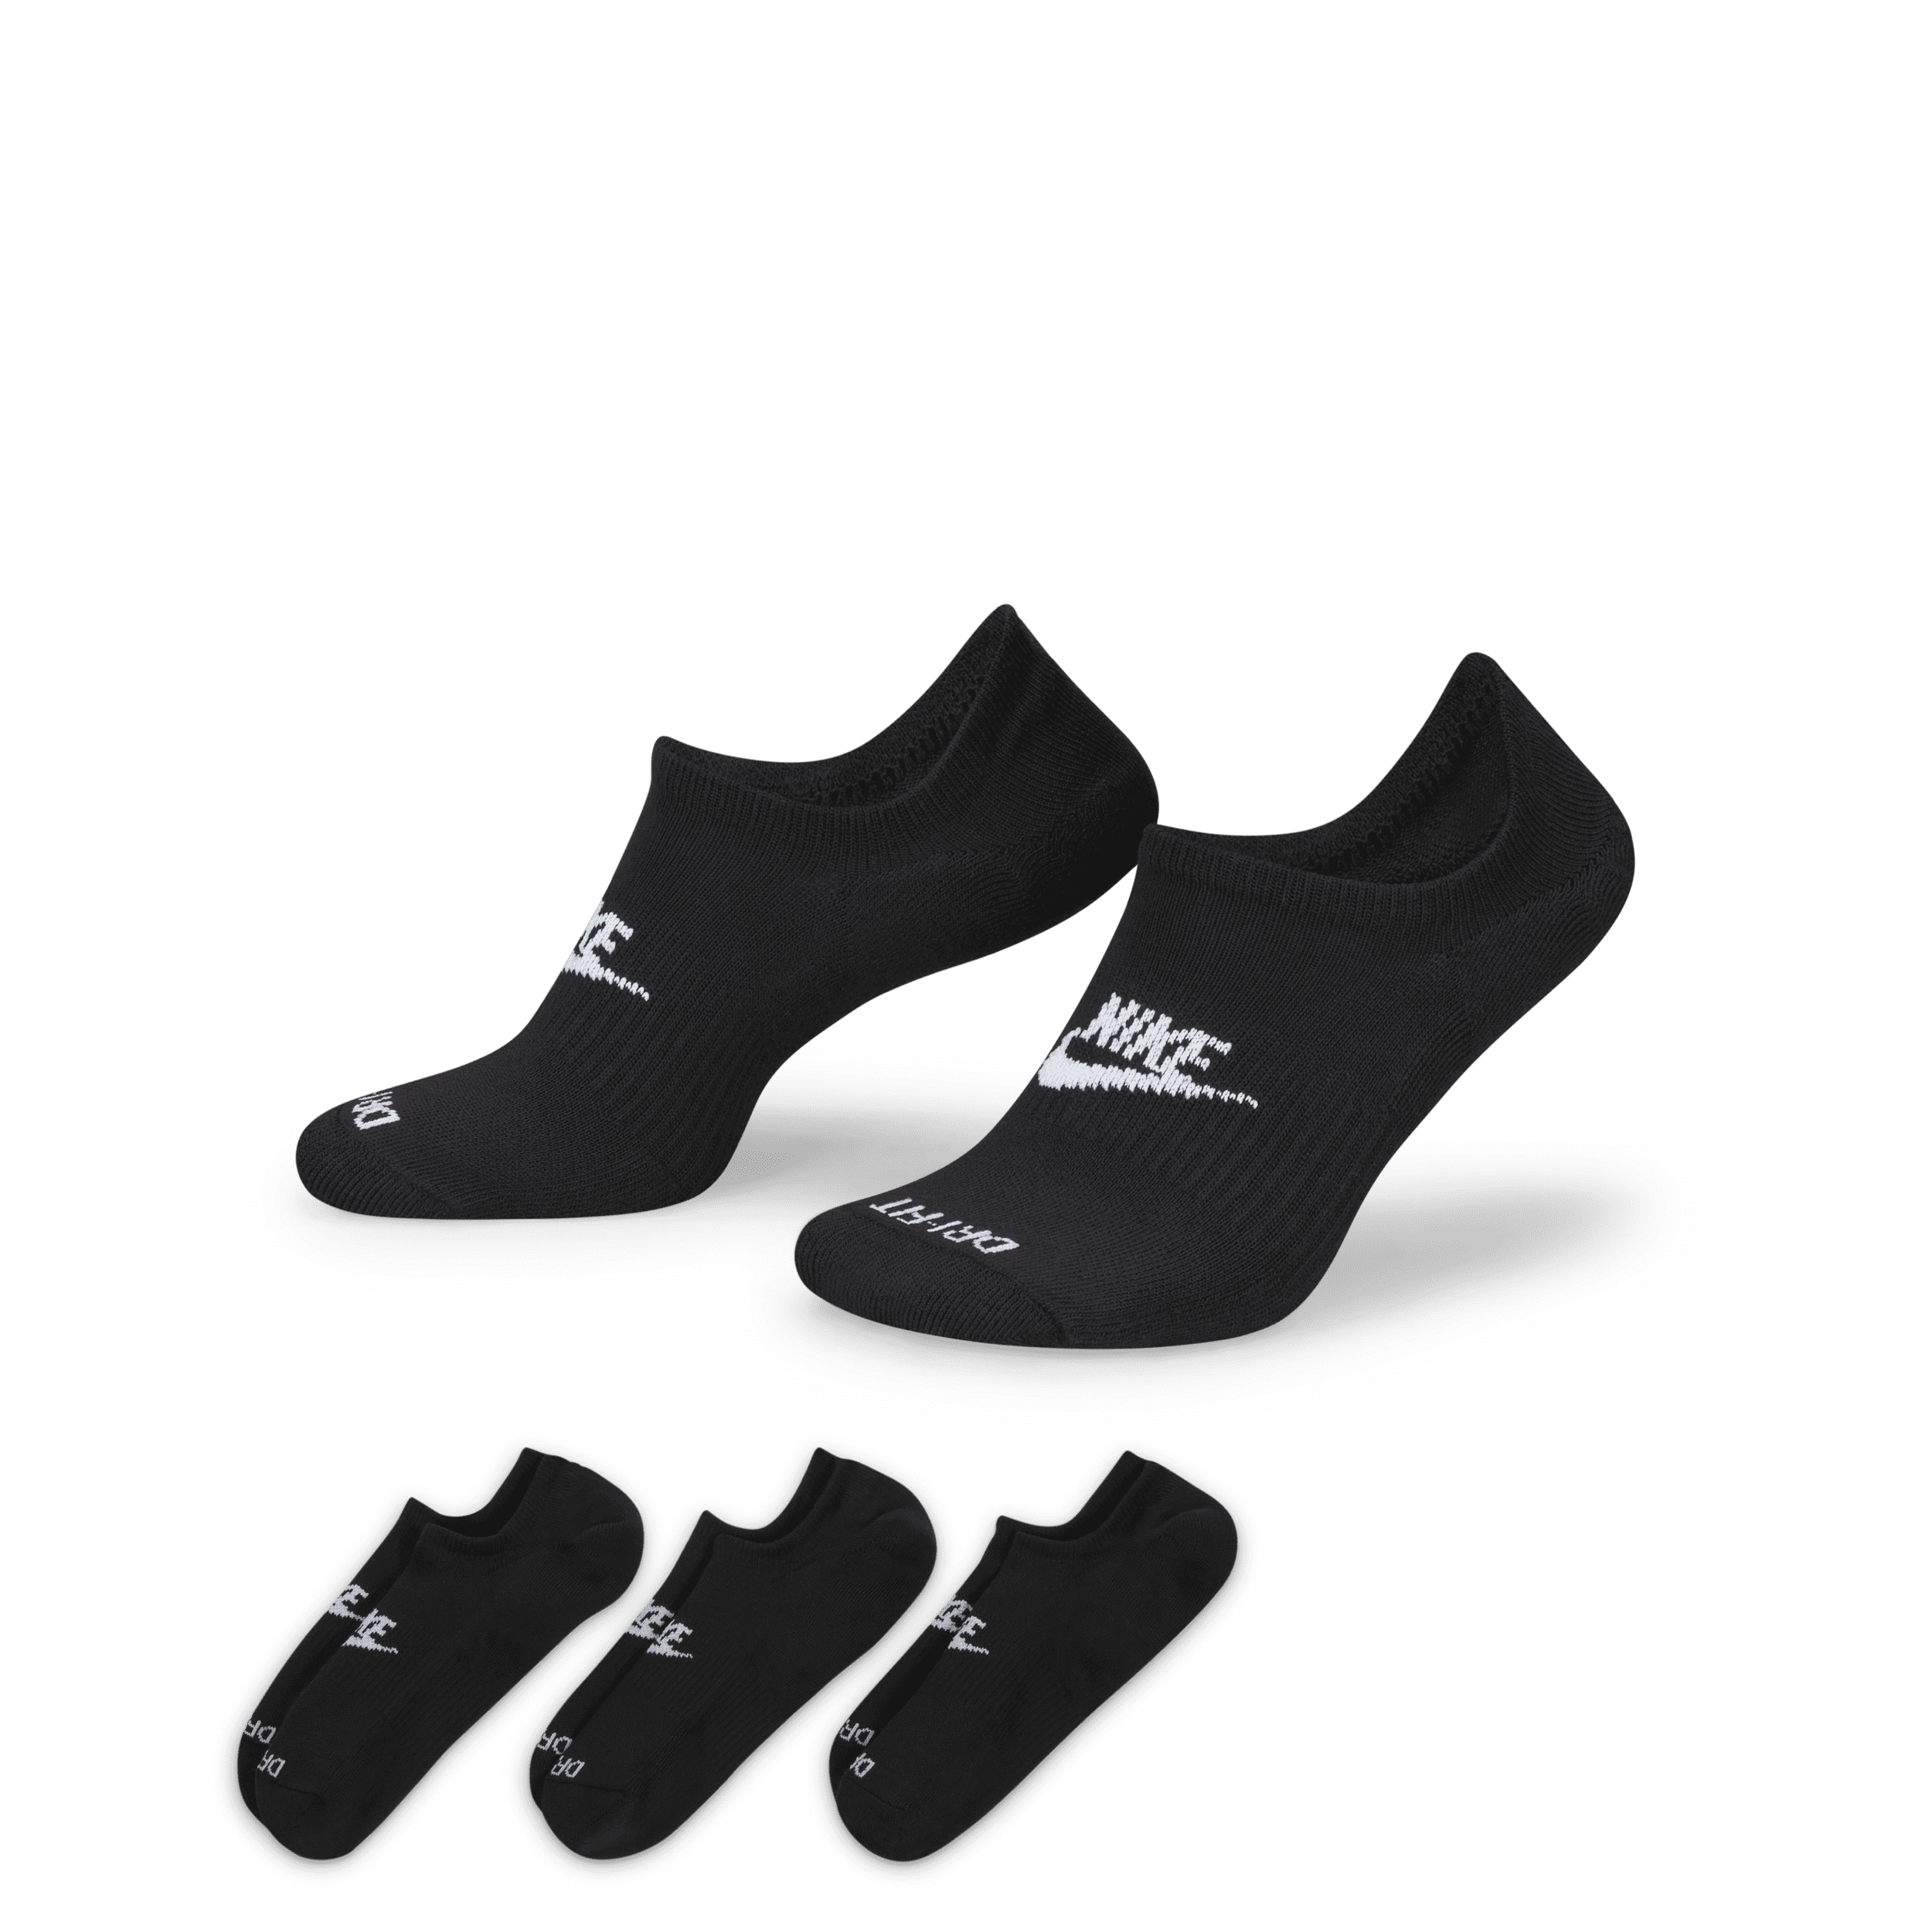 Everyday Plus Cushioned Nike Footie Calcetines - Negro